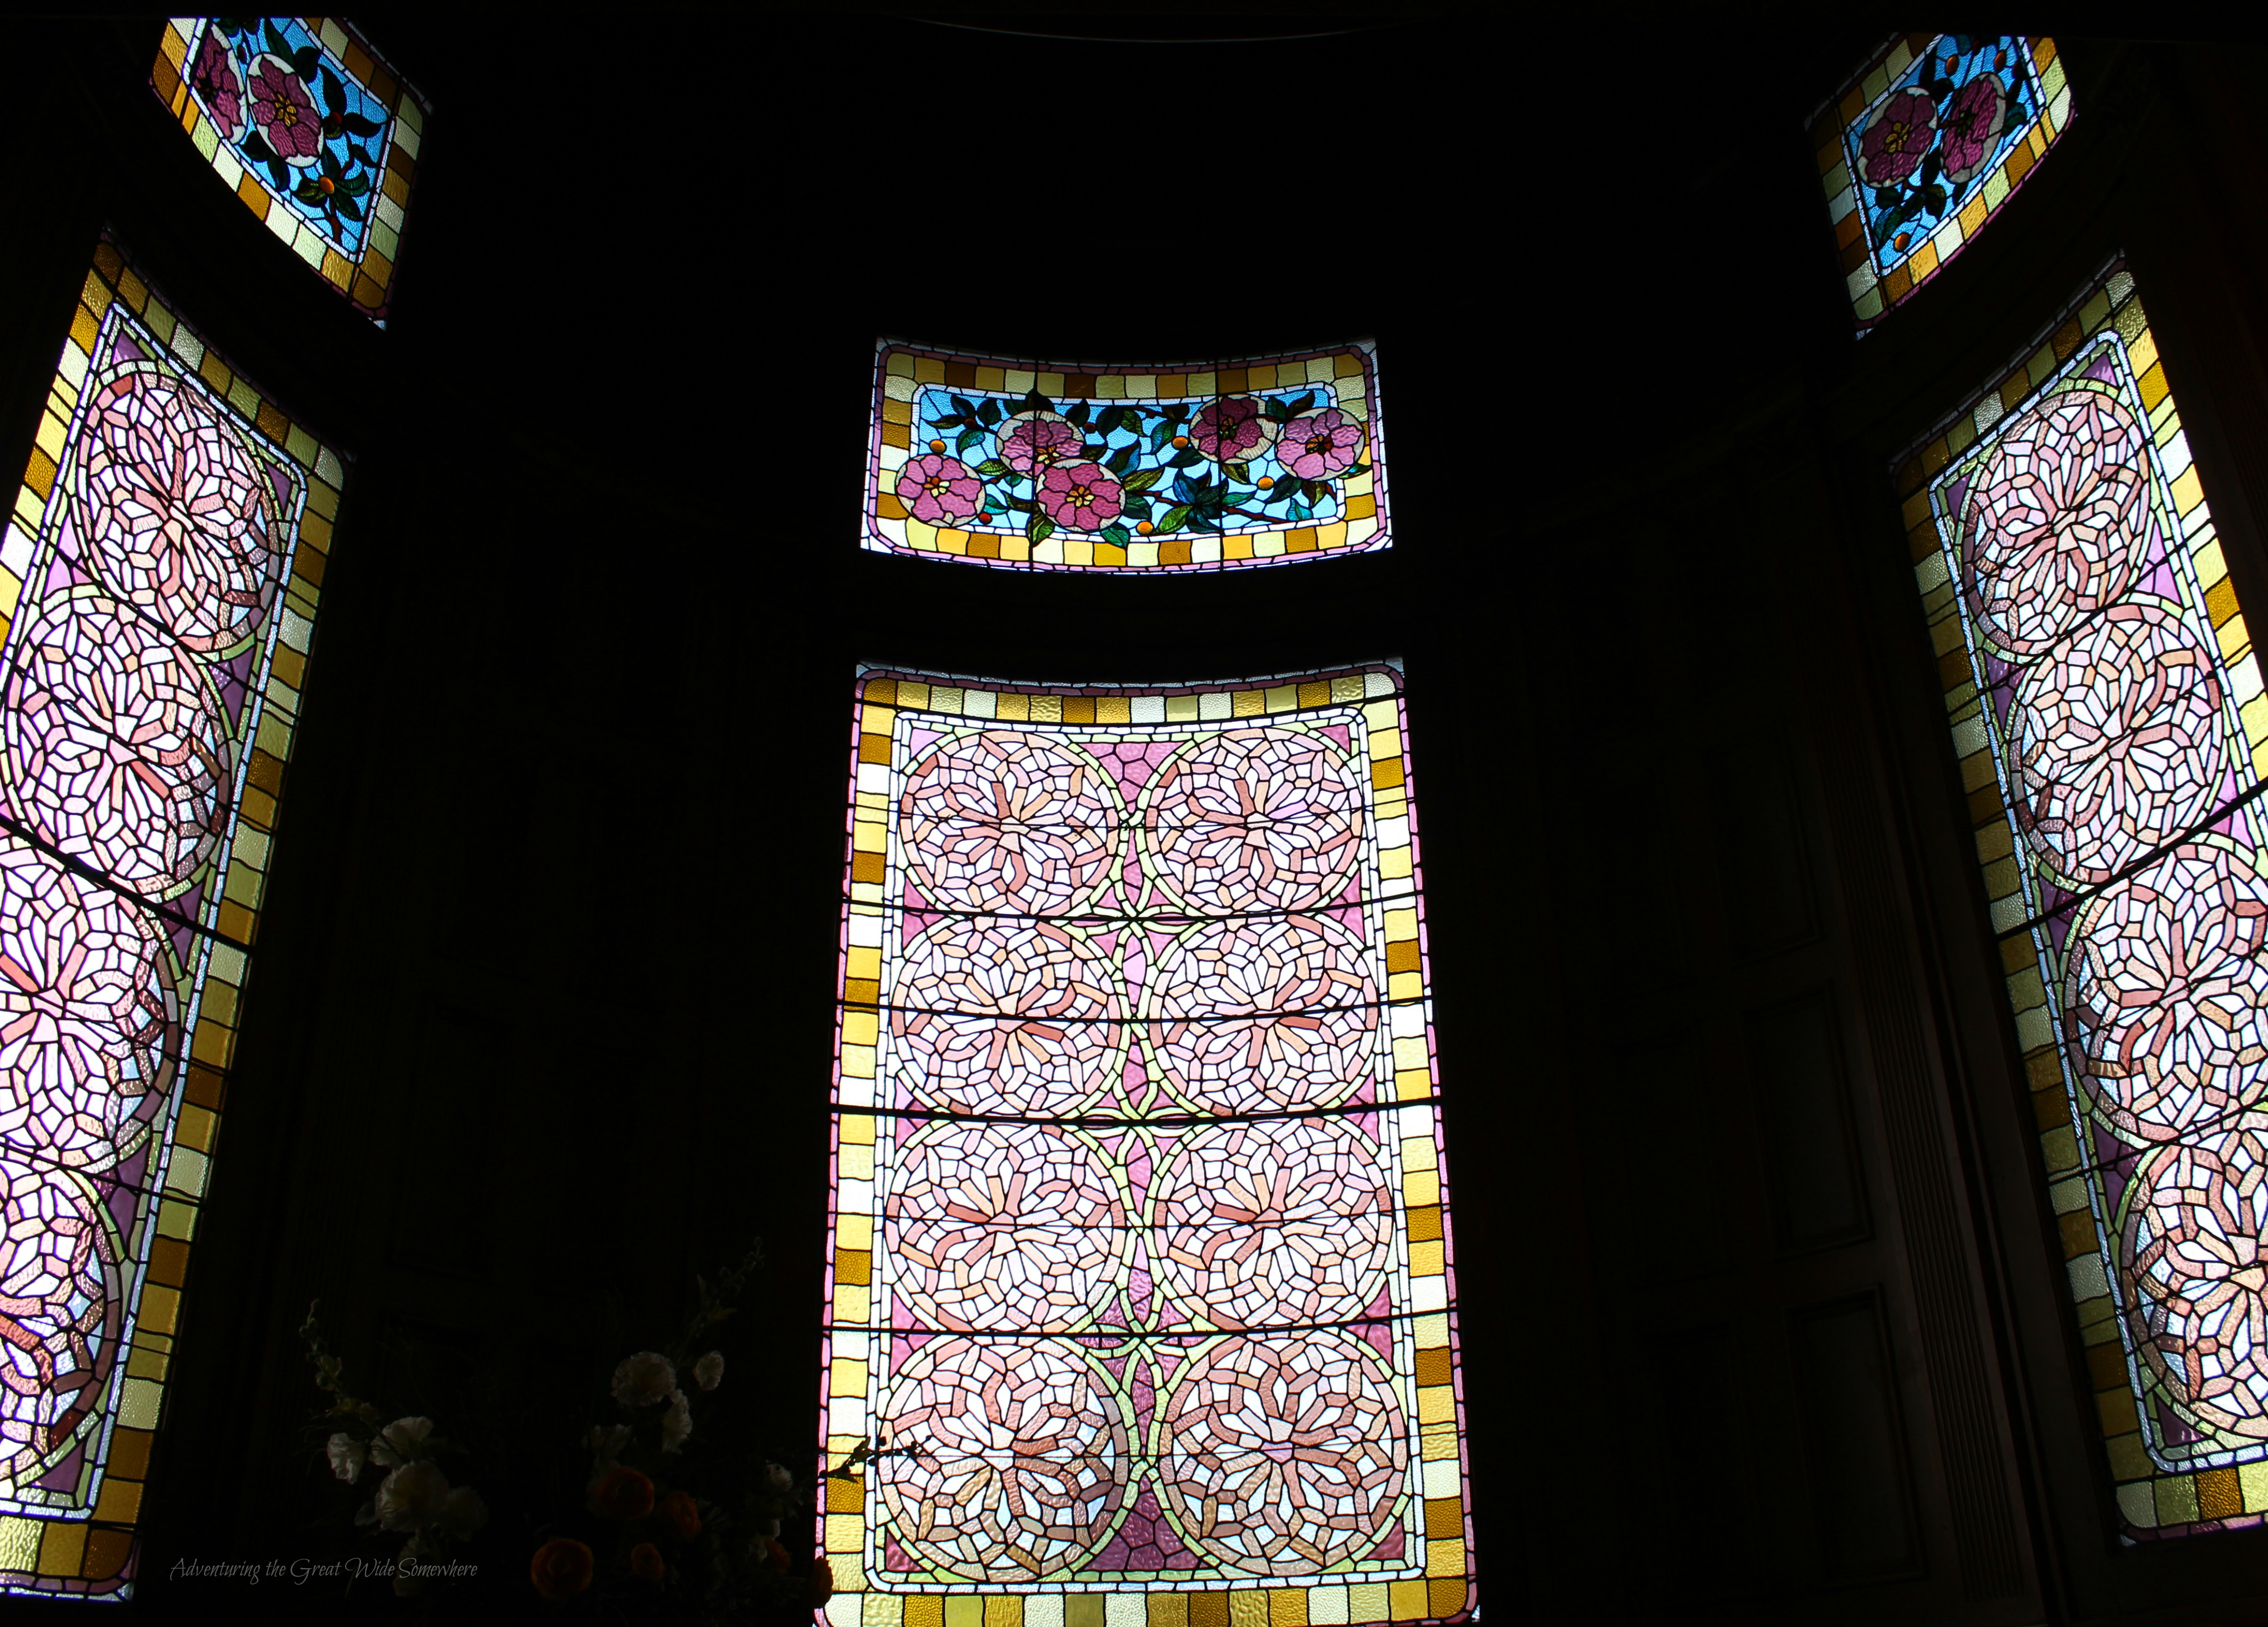 Rose Stained Glass Windows on the Landing of Craigdarroch Castle